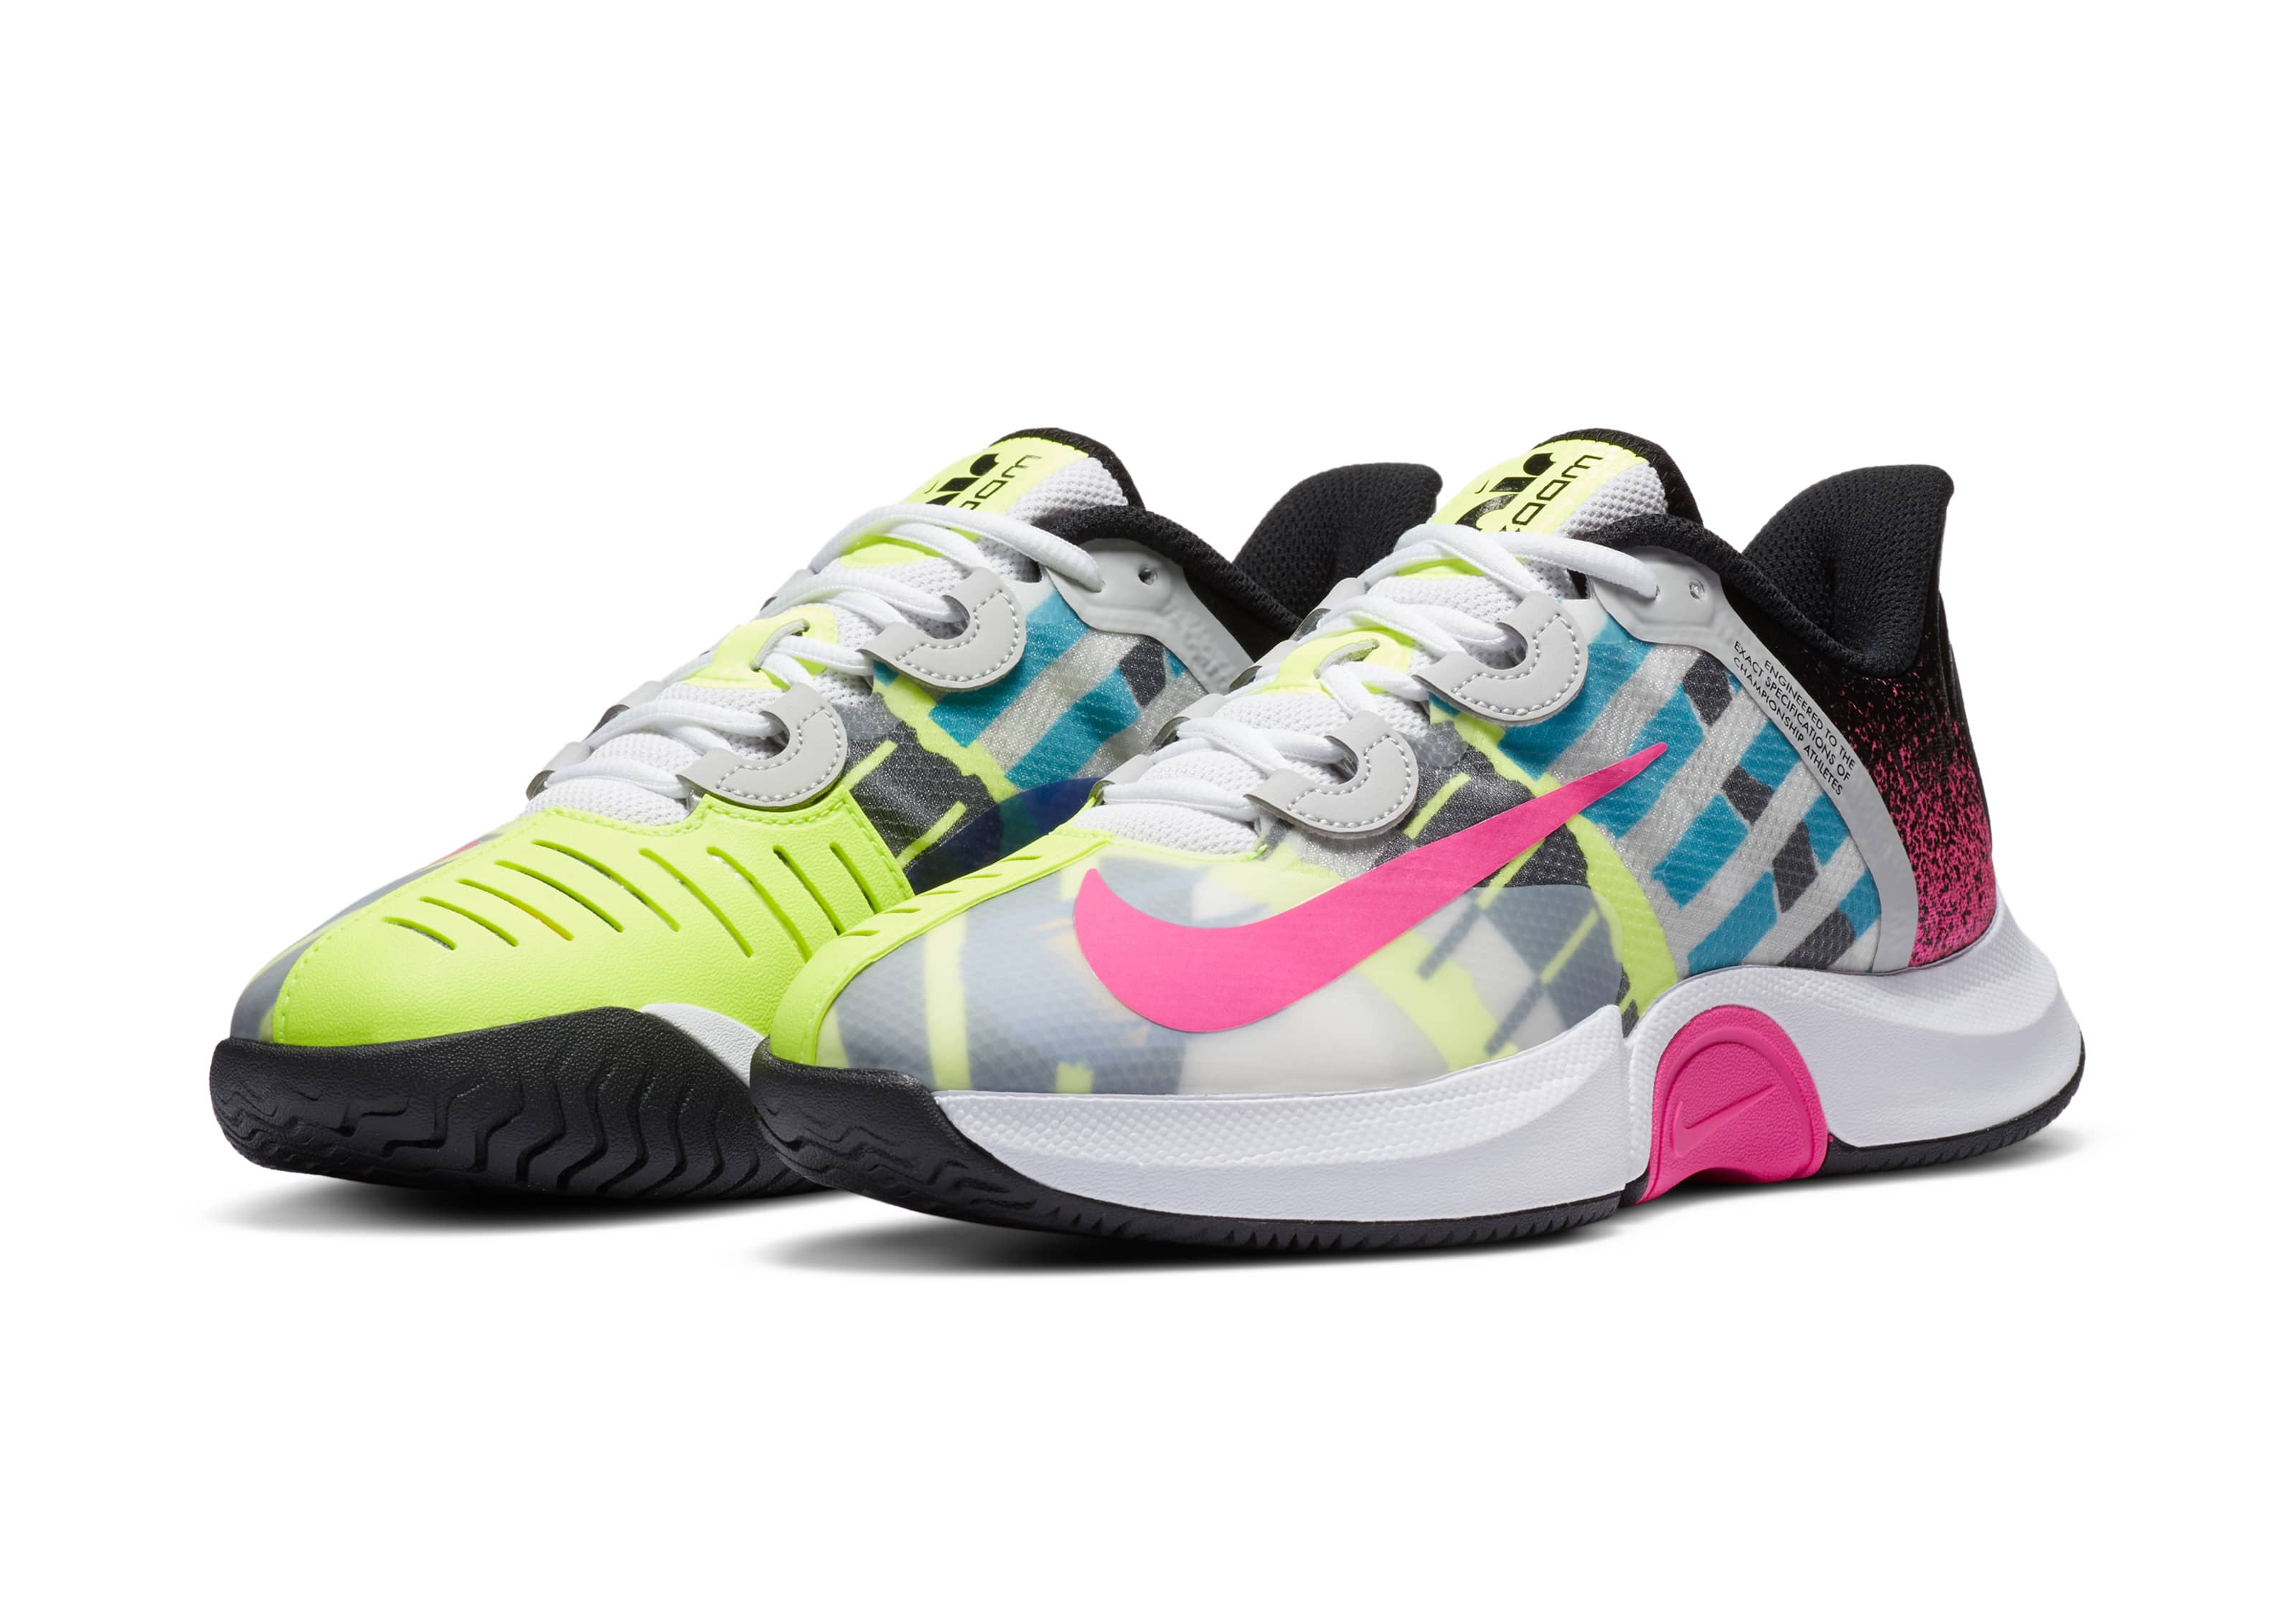 Nike to feature Andre Agassi-inspired 